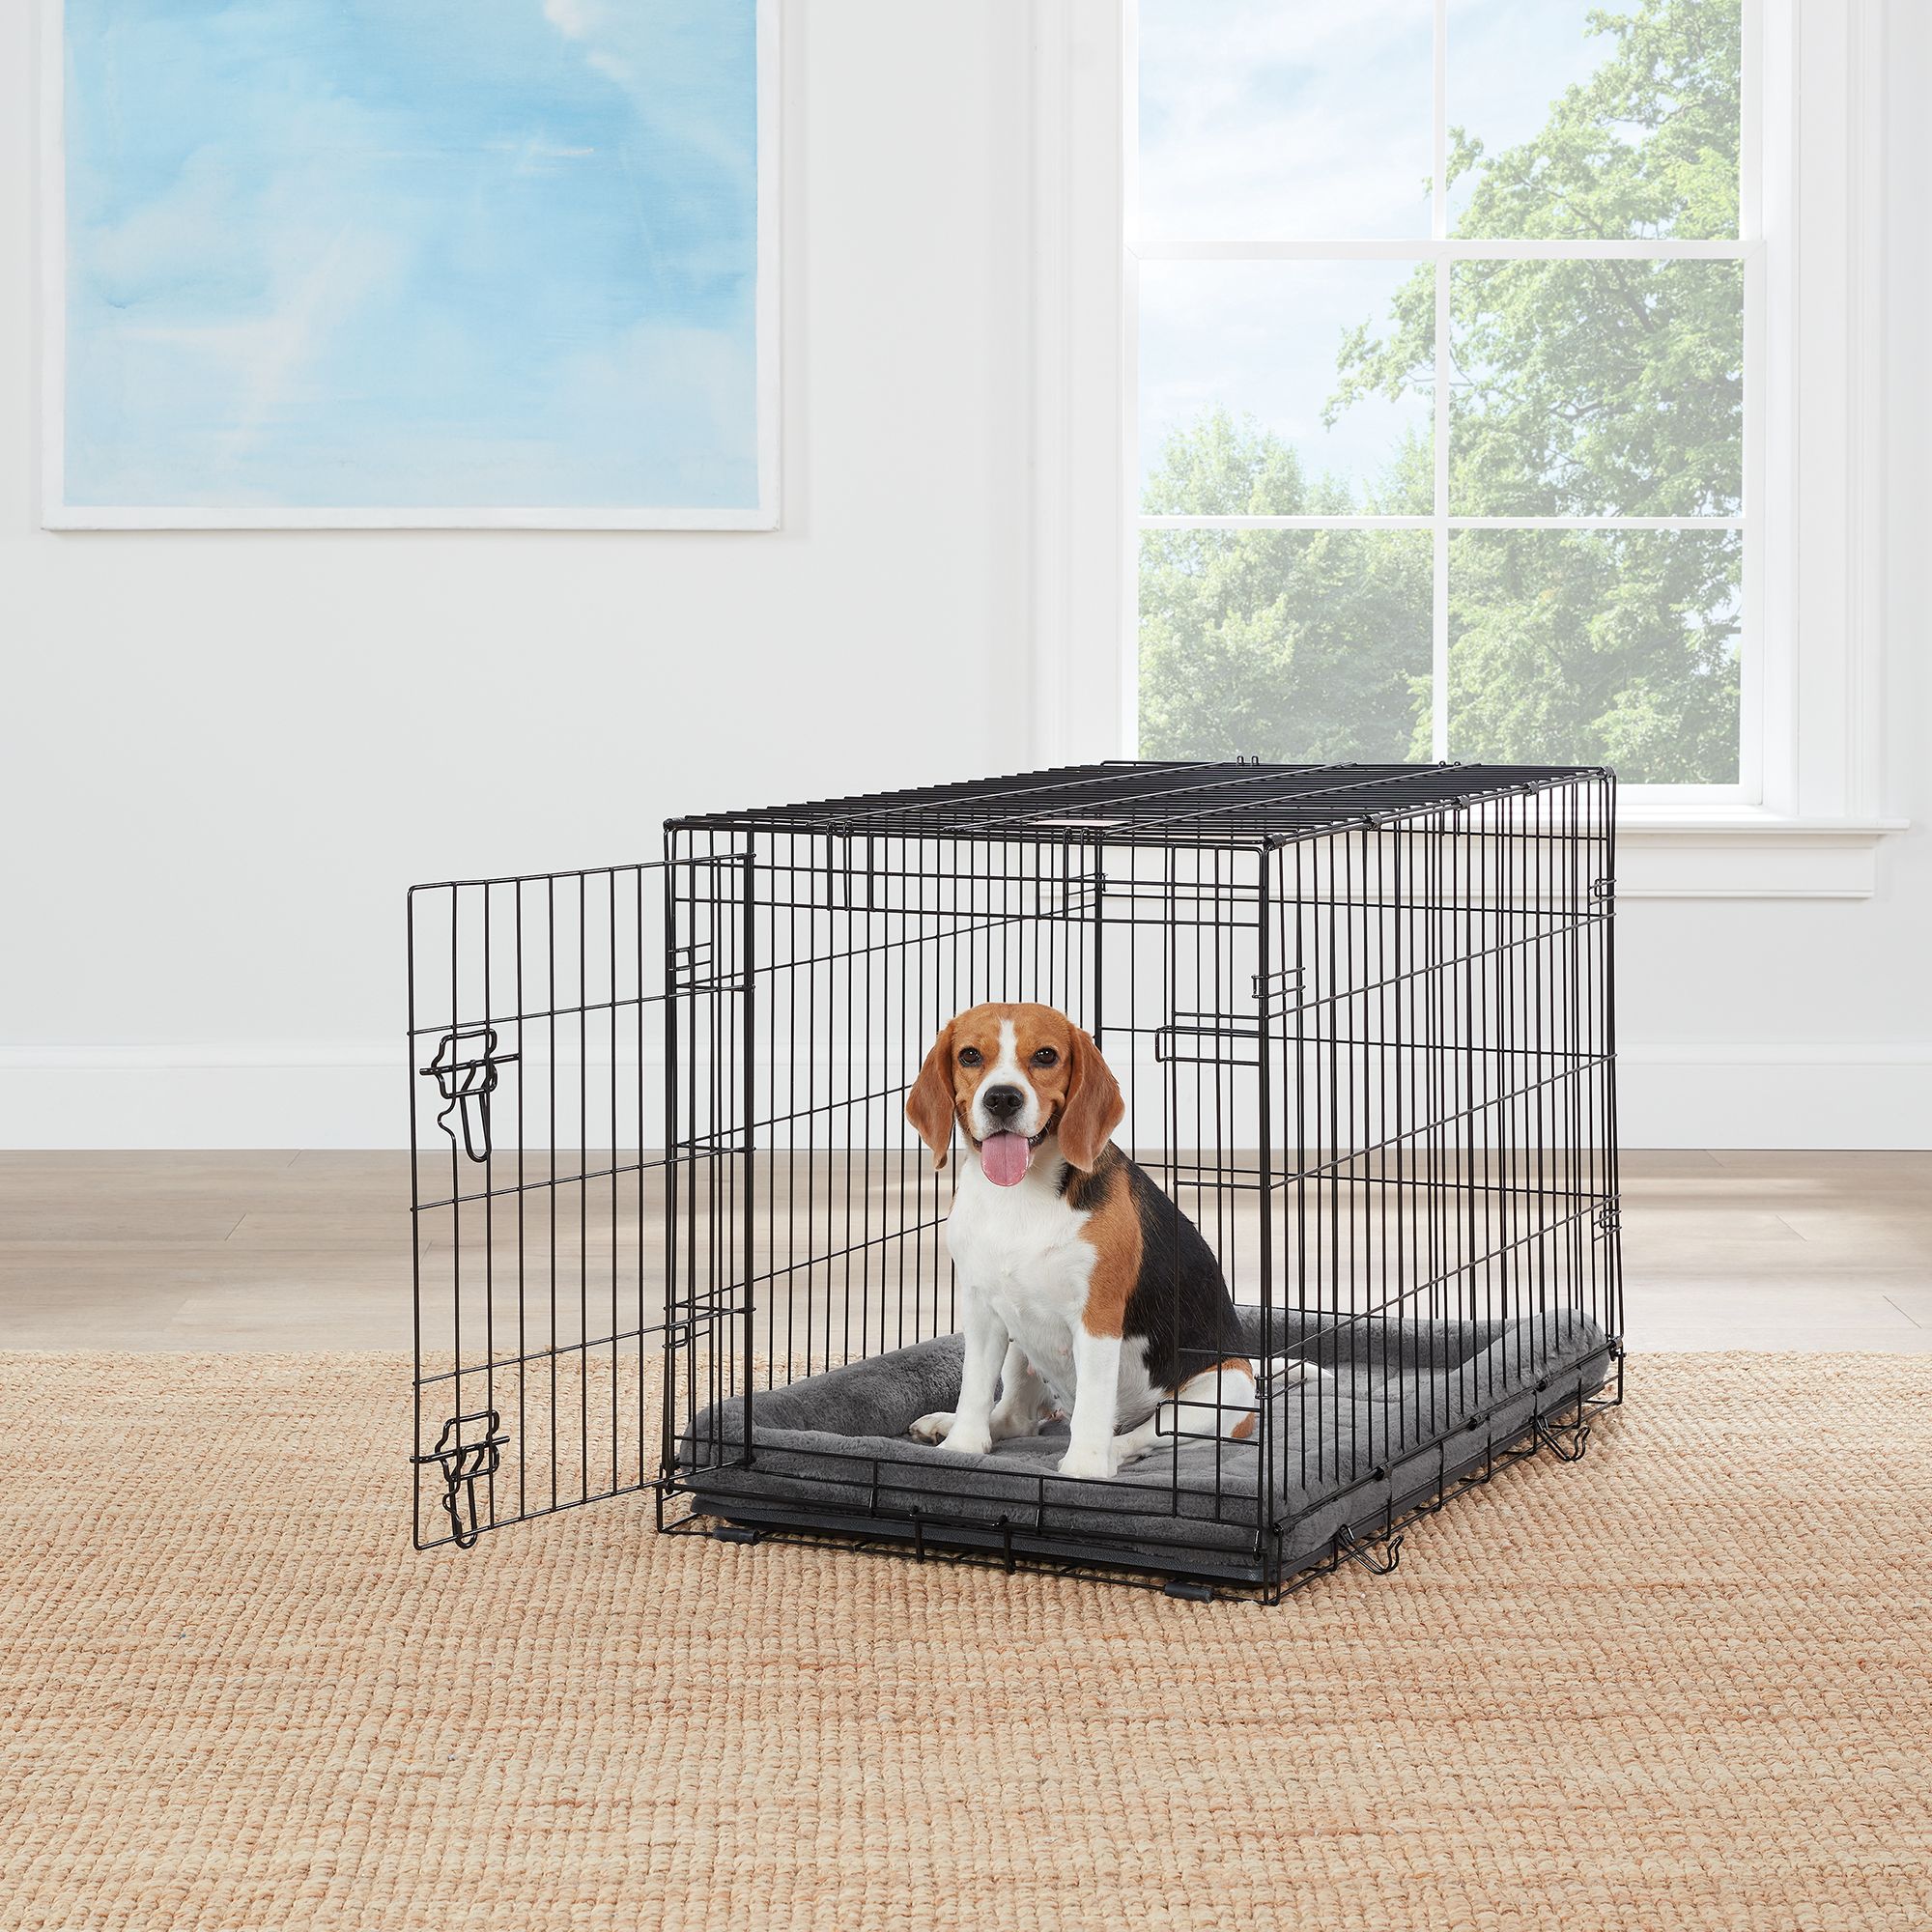 Making Your Dog's Crate Feel Like Home #CrateHappyPets #ad @PetSmart